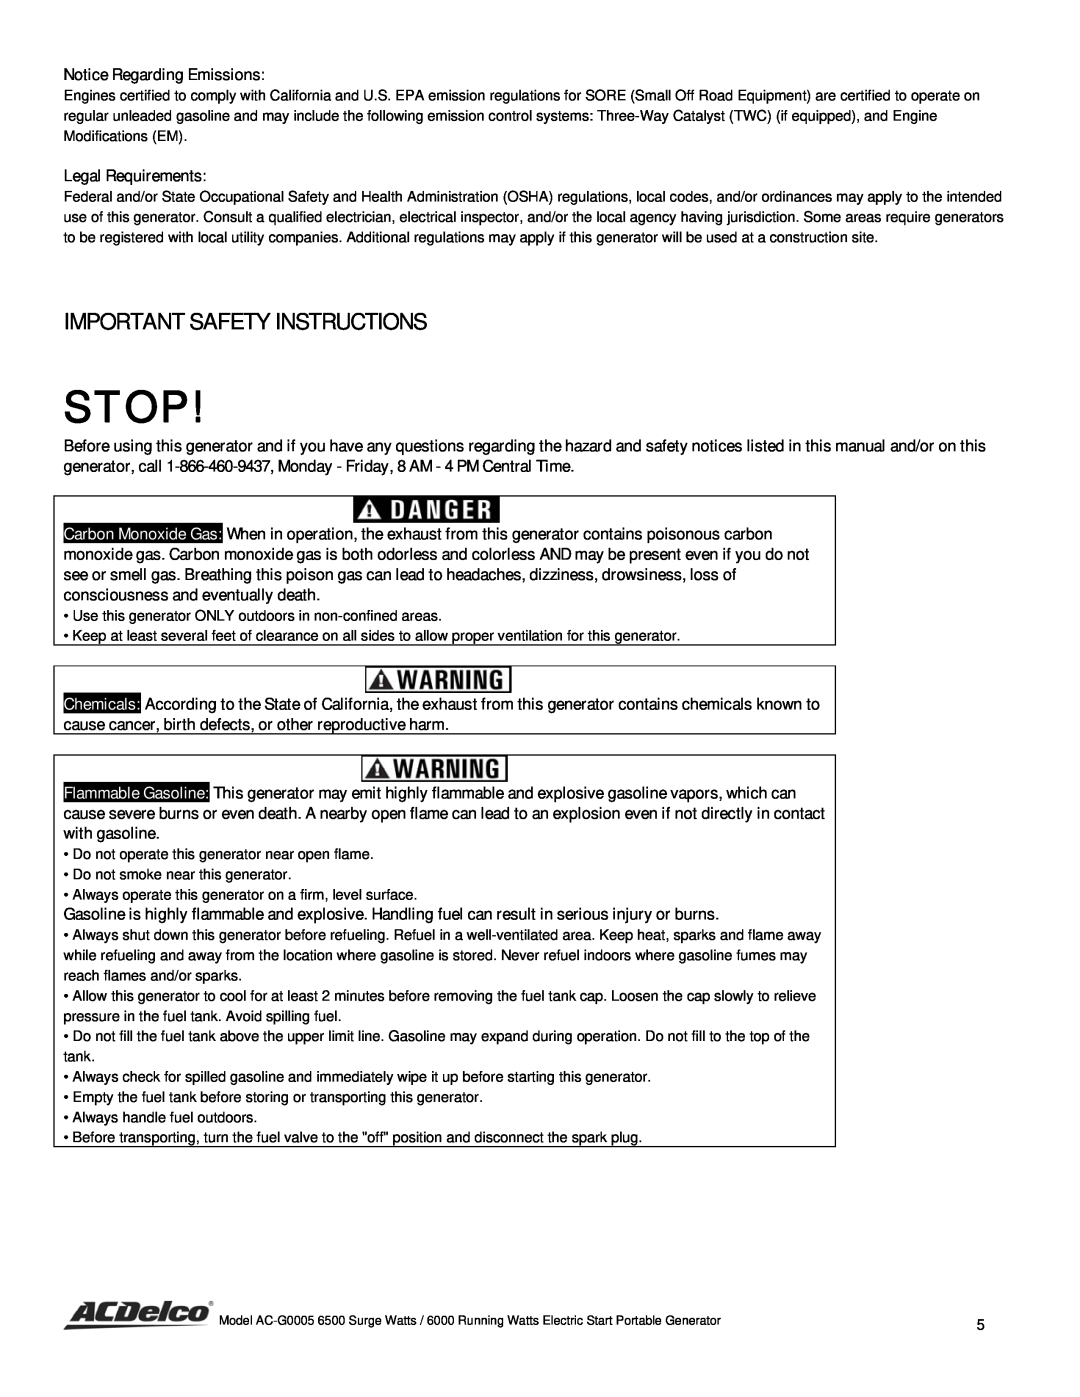 ACDelco AC-G0005 instruction manual Important Safety Instructions, Stop, Notice Regarding Emissions, Legal Requirements 